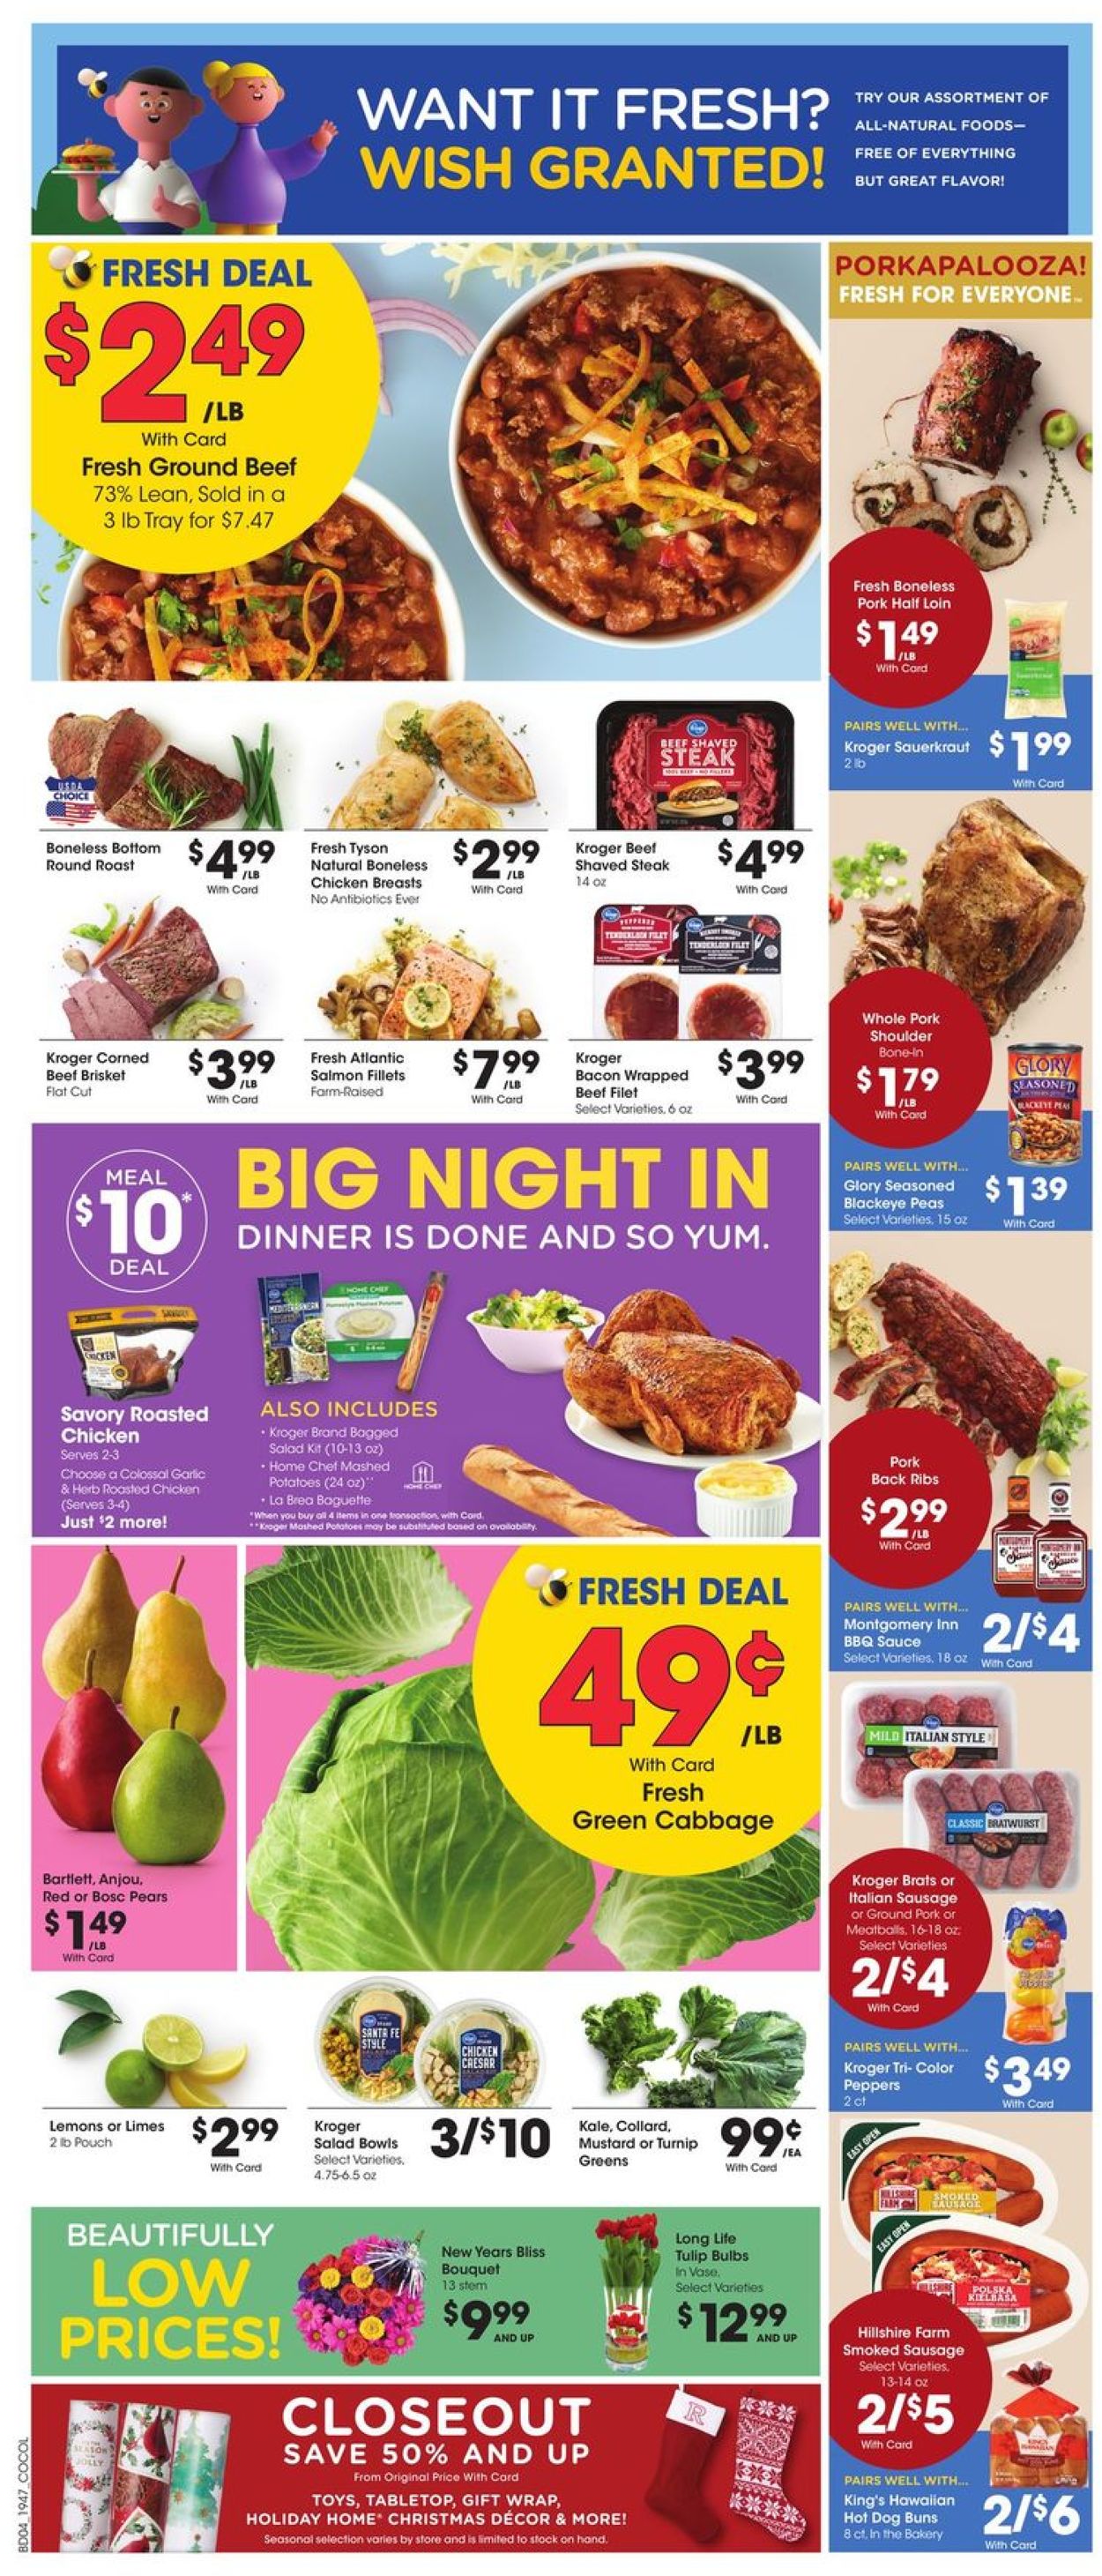 Catalogue Kroger - New Year's Ad 2019/2020 from 12/26/2019